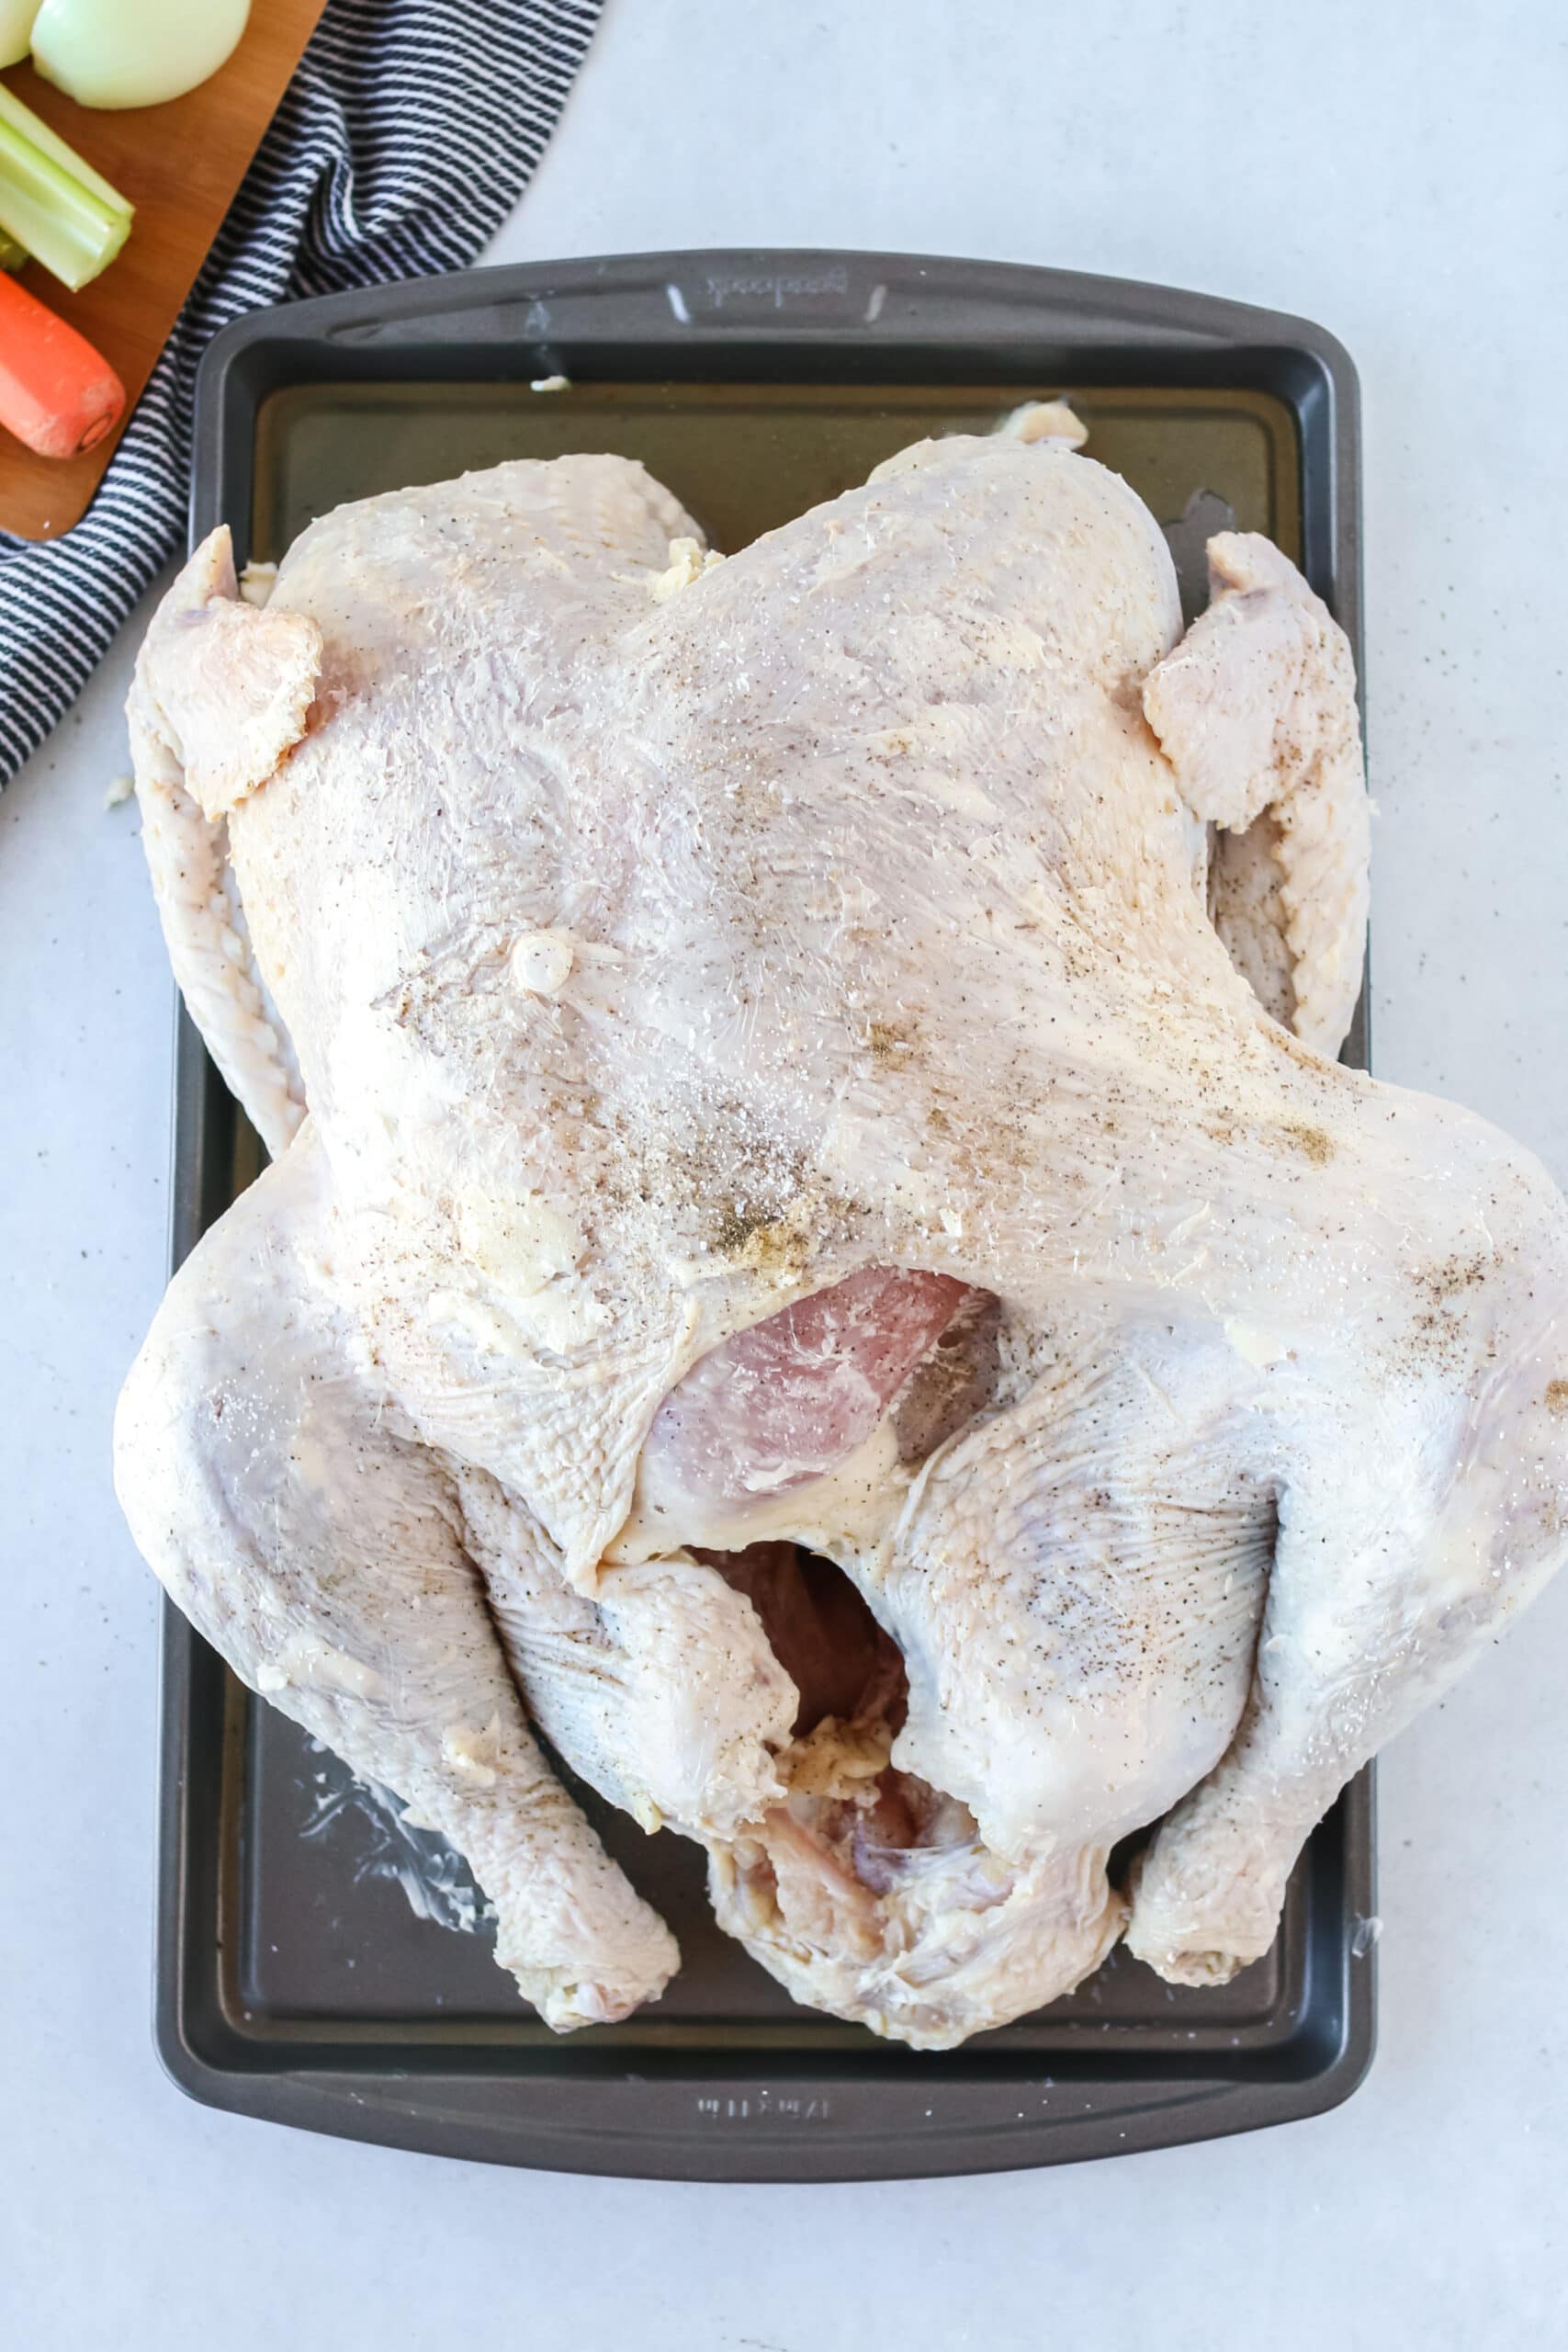 How Long To Cook Turkey Breast In Electric Roaster?